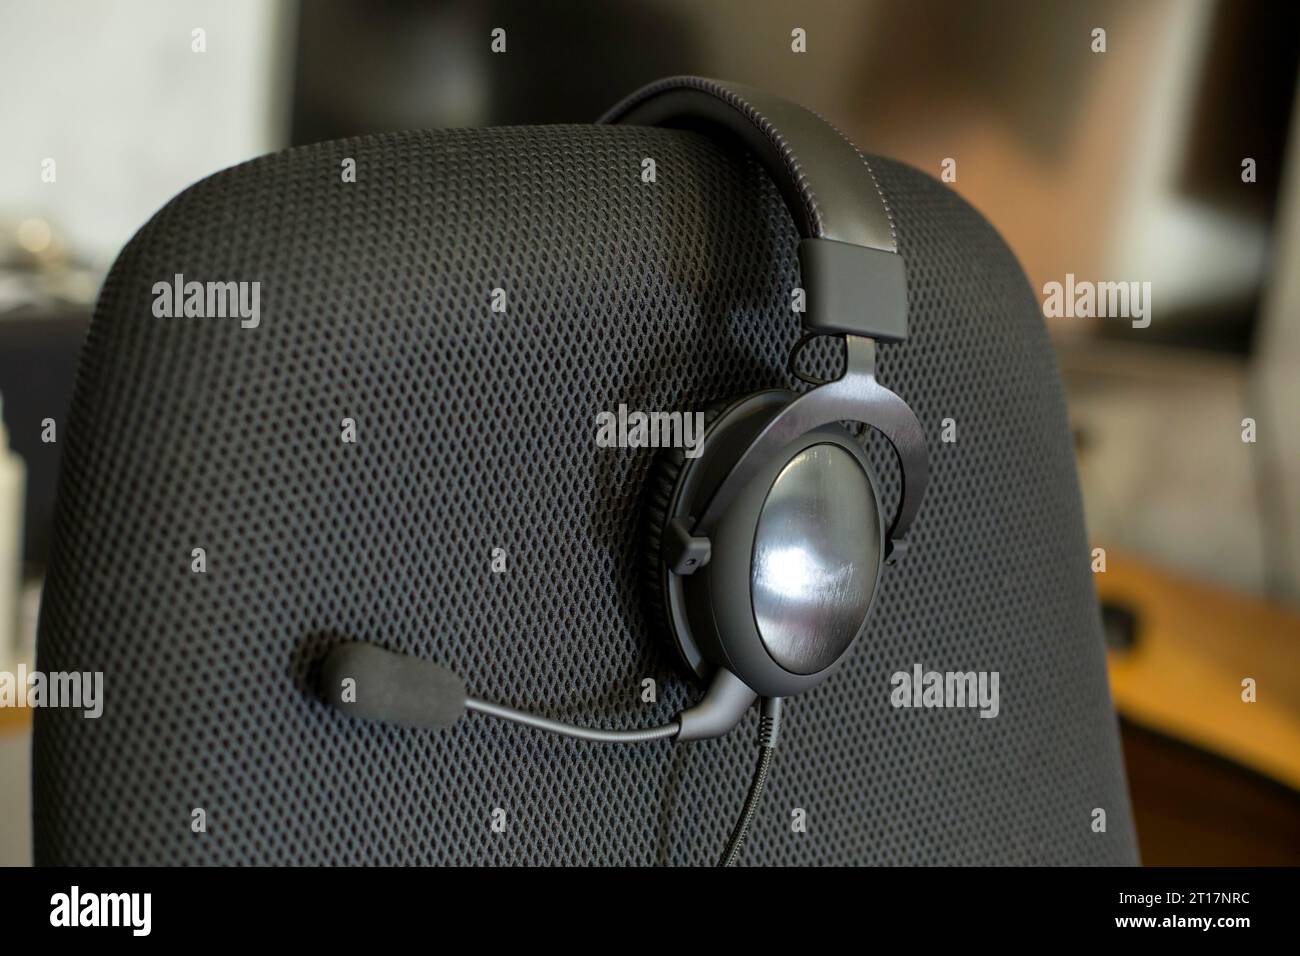 black headset on backrest of empty computer chair with air mesh upholstery Stock Photo